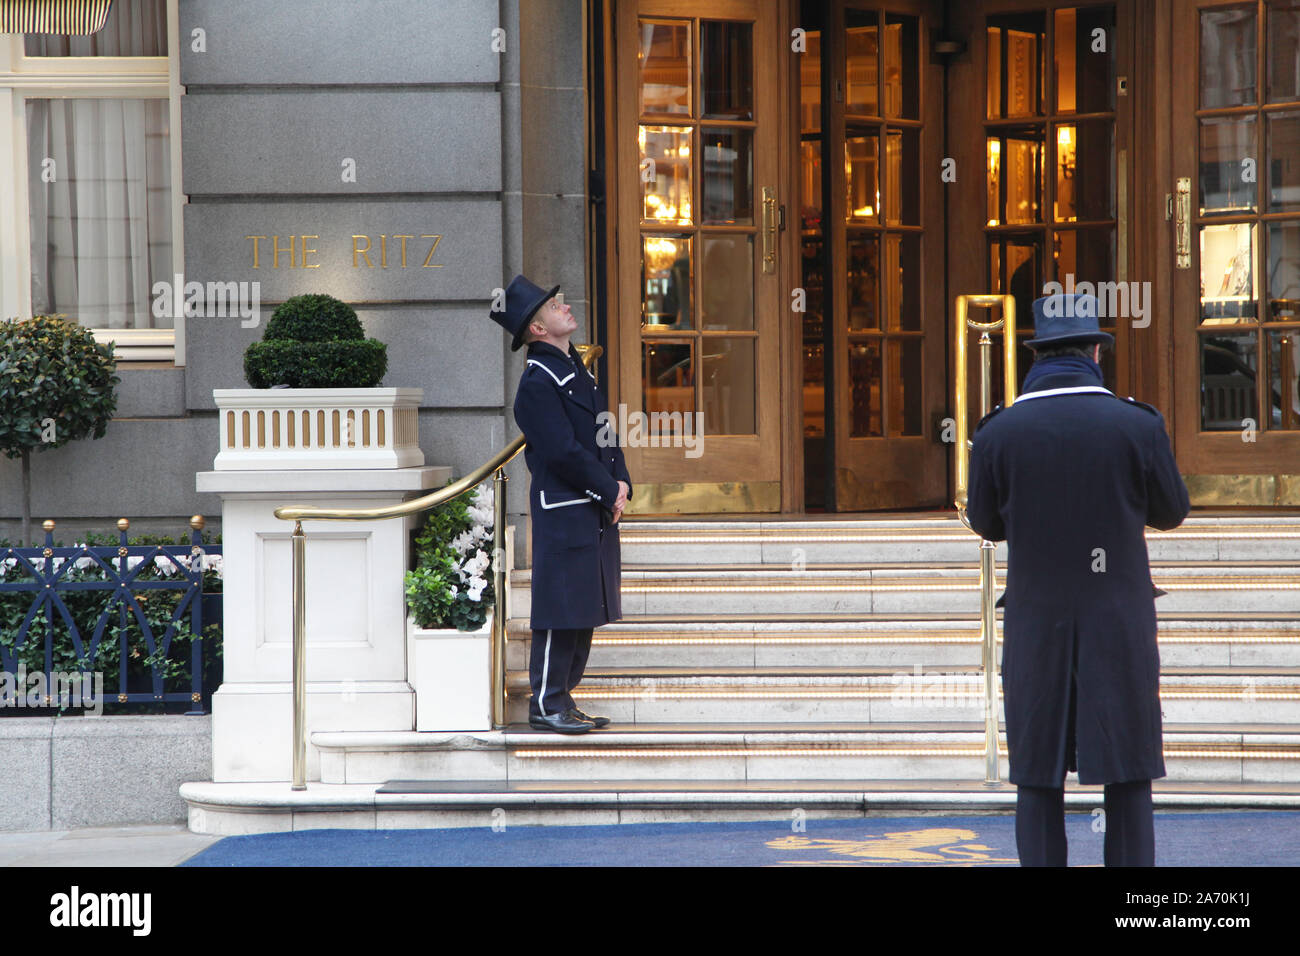 Two doorman stand outside the entrance to The Ritz Hotel on Arlington Street, Mayfair, London Stock Photo